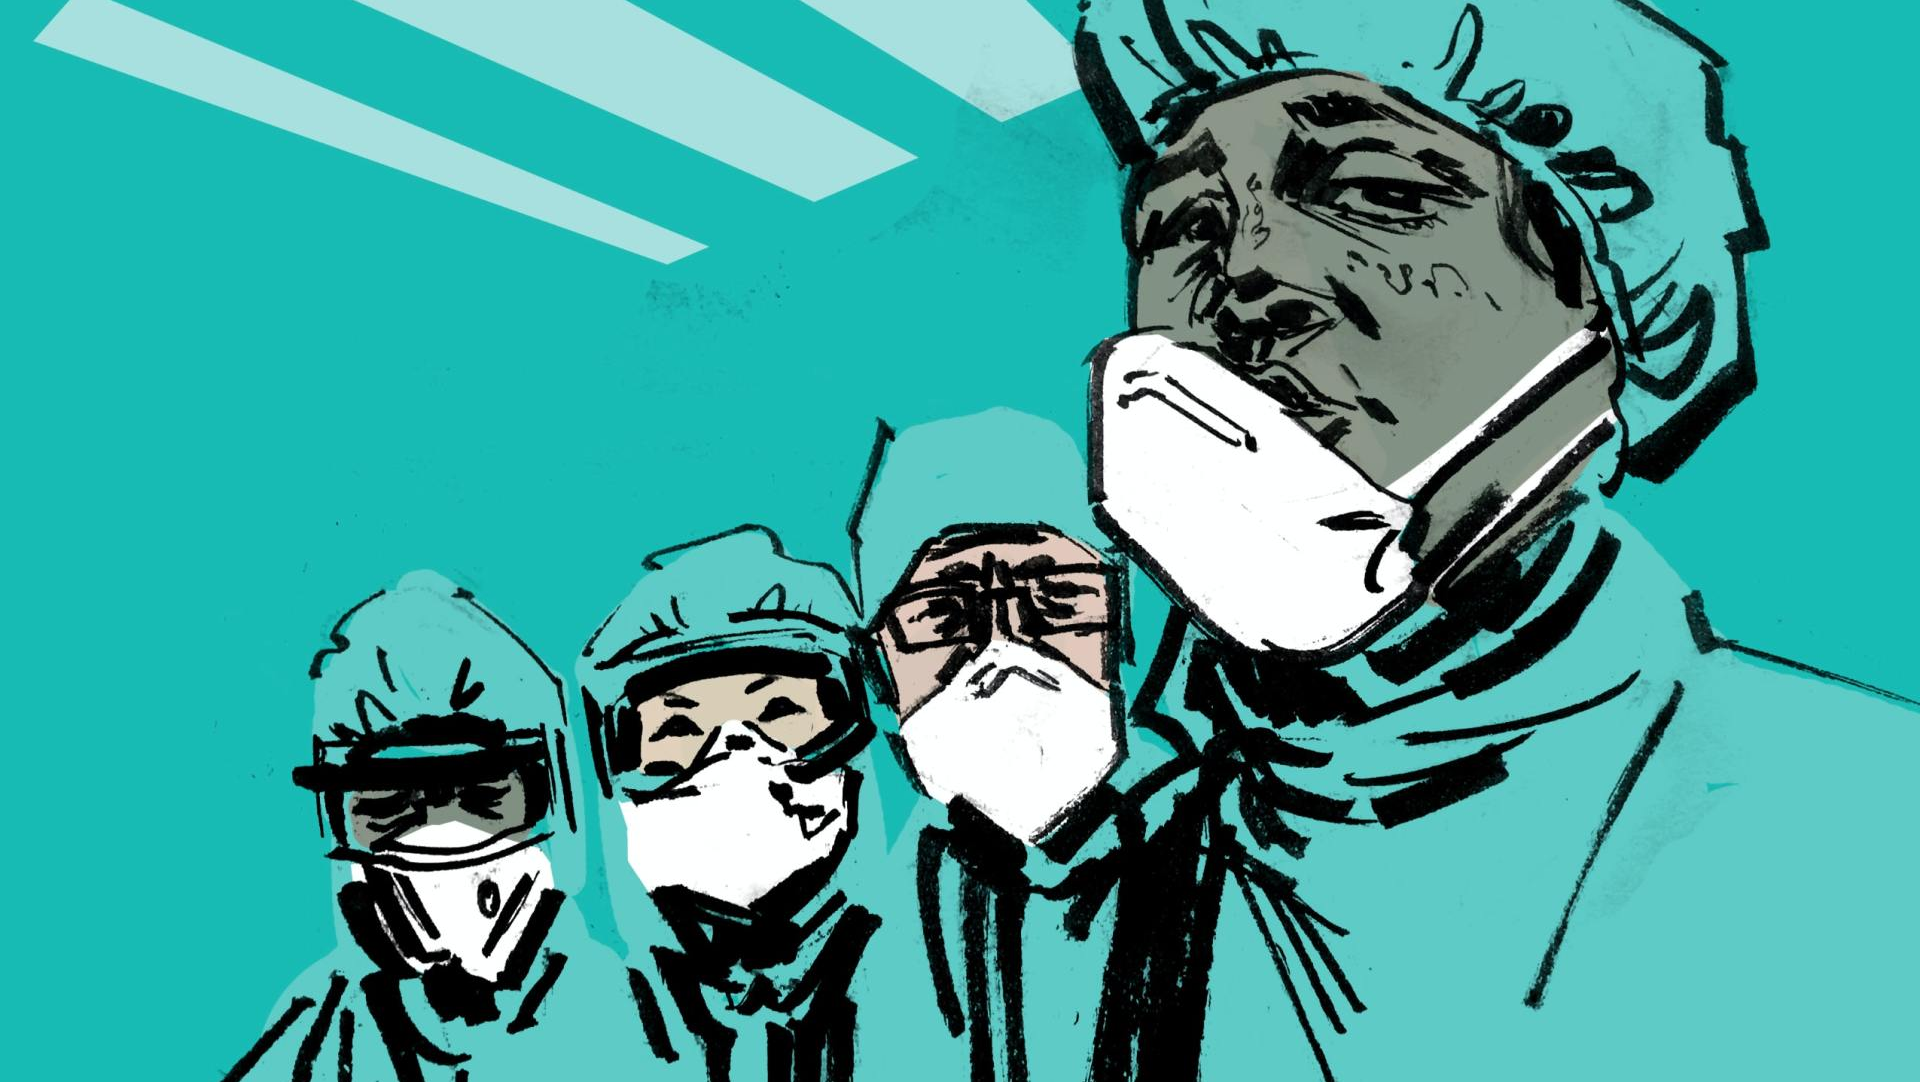 UN Graphic Design Image of Doctors in PPE by Kevin Kobsic